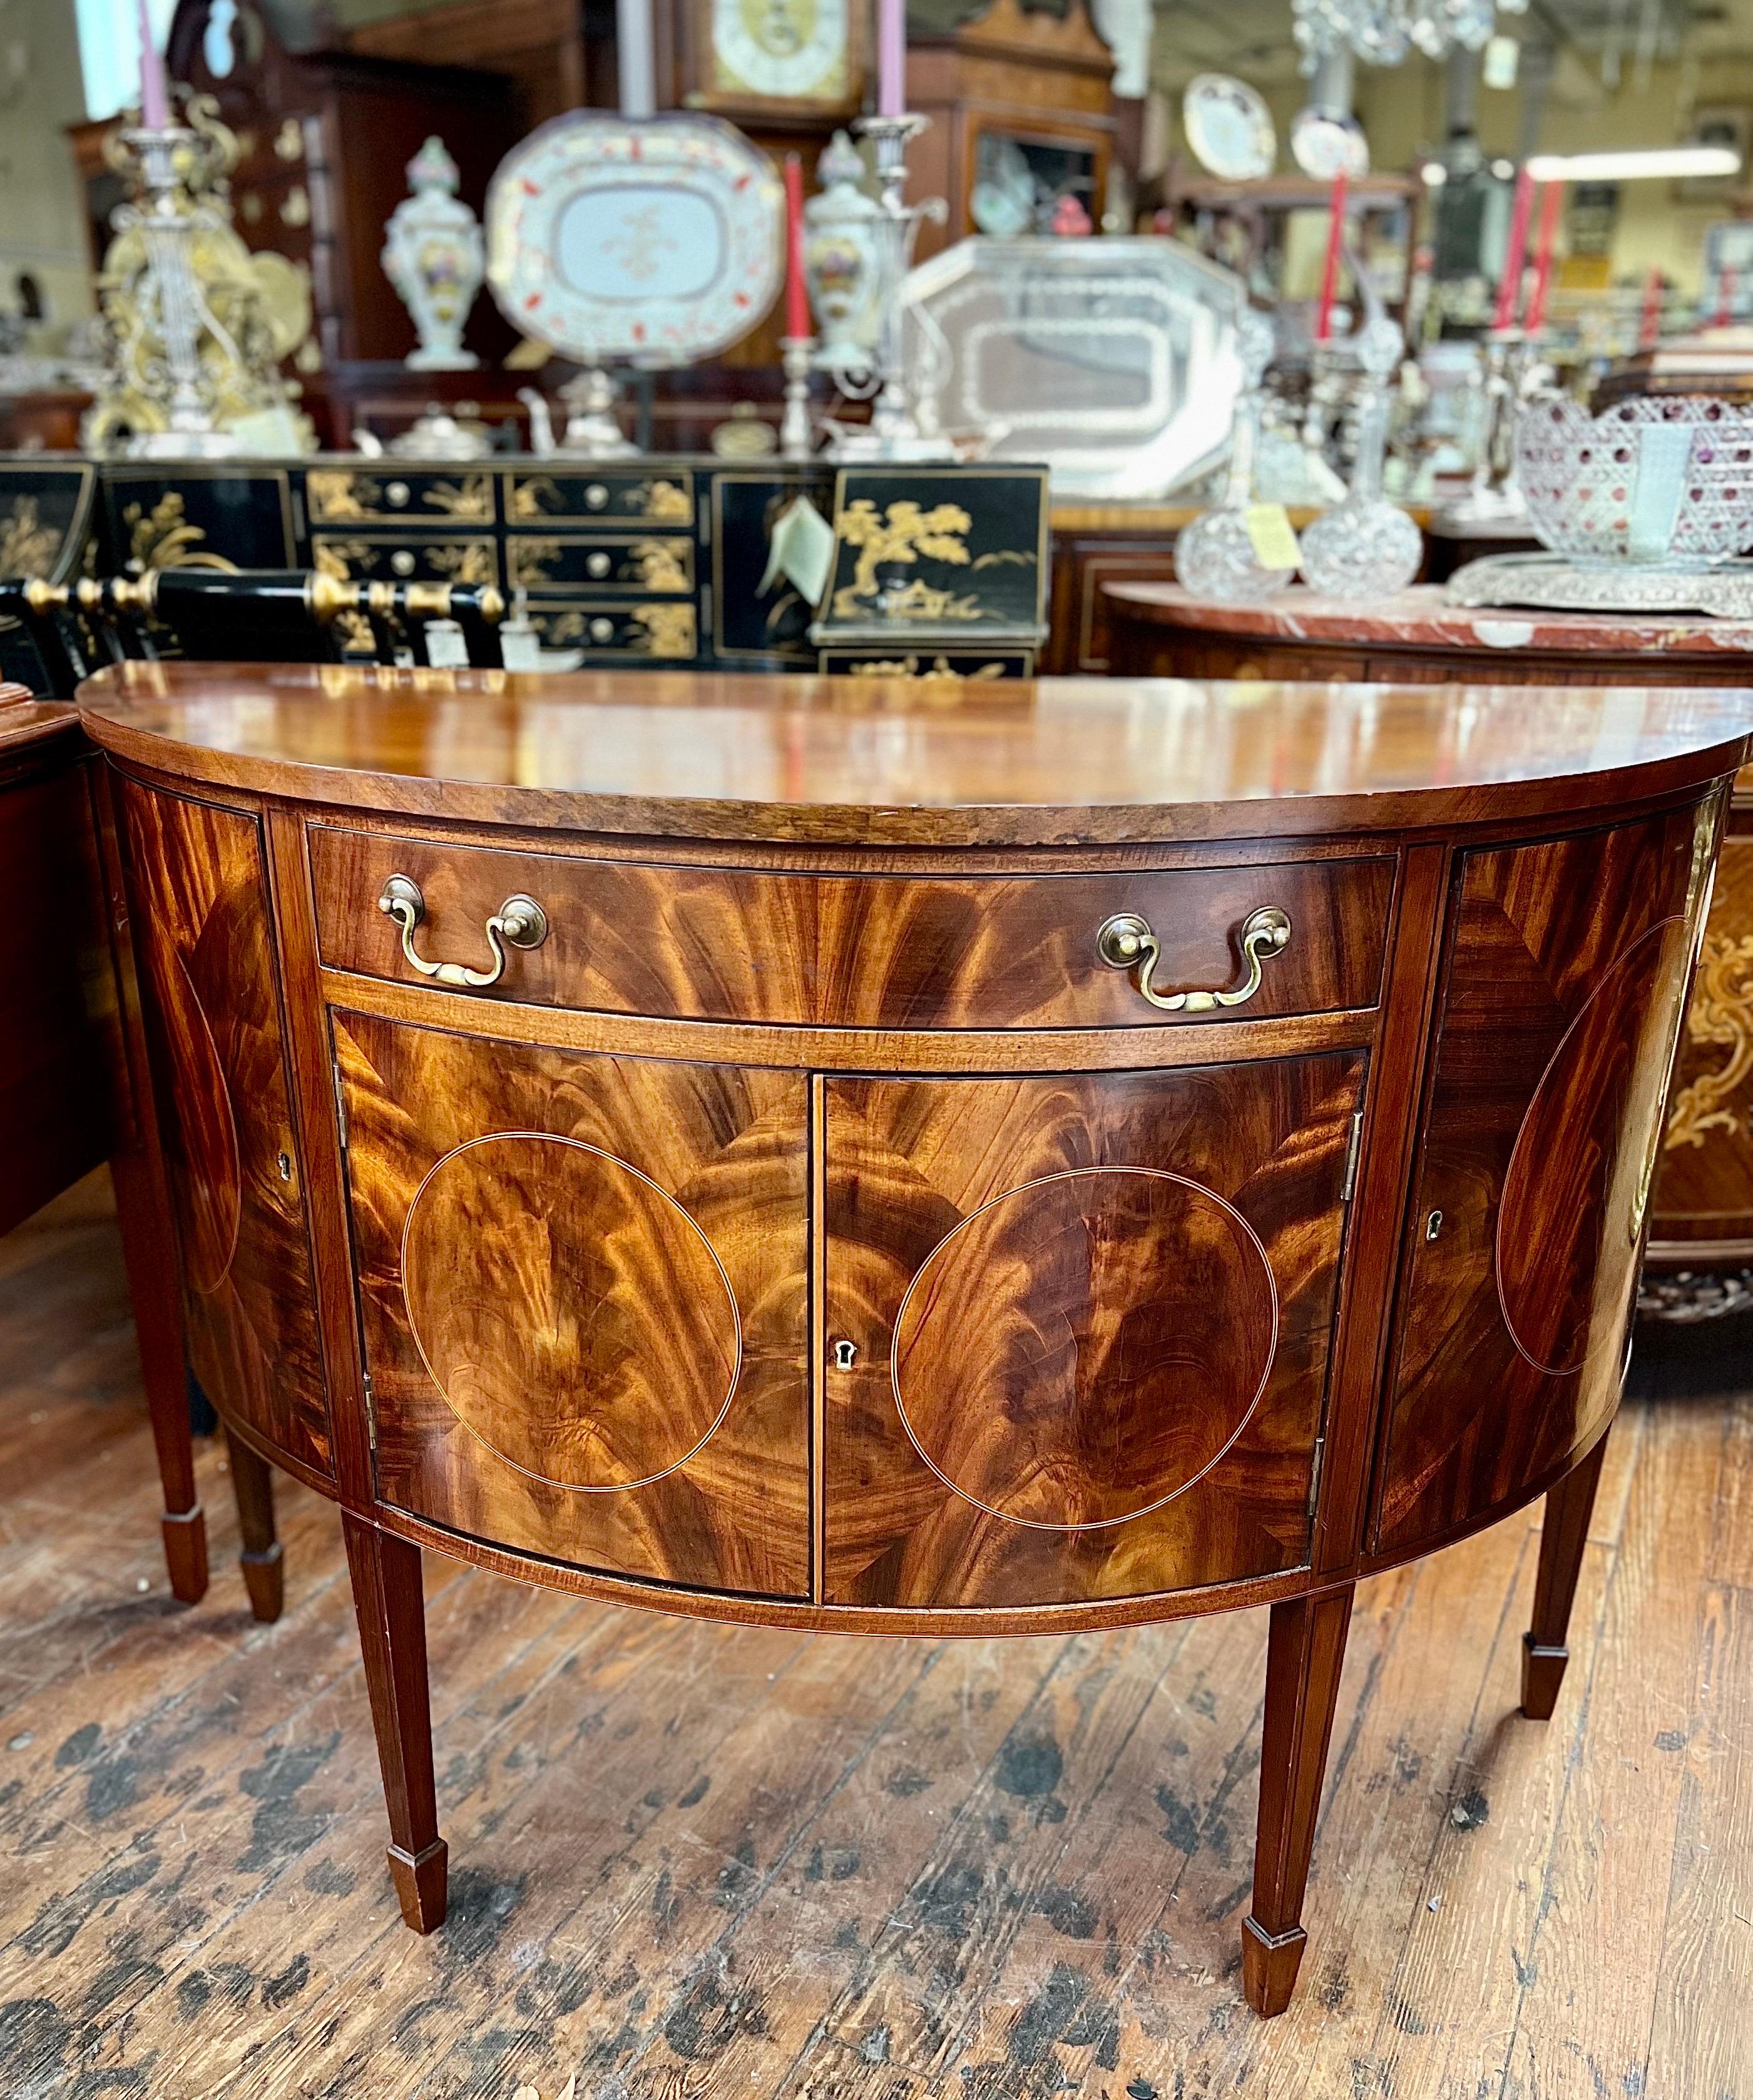 This wonderful late 19th Century English demilune Sideboard, Server or Commode has some of the most fabulous book-matched flame or crotch mahogany veneers along the front of the cupboards and drawer.  The top is solid mahogany which is crossbanded